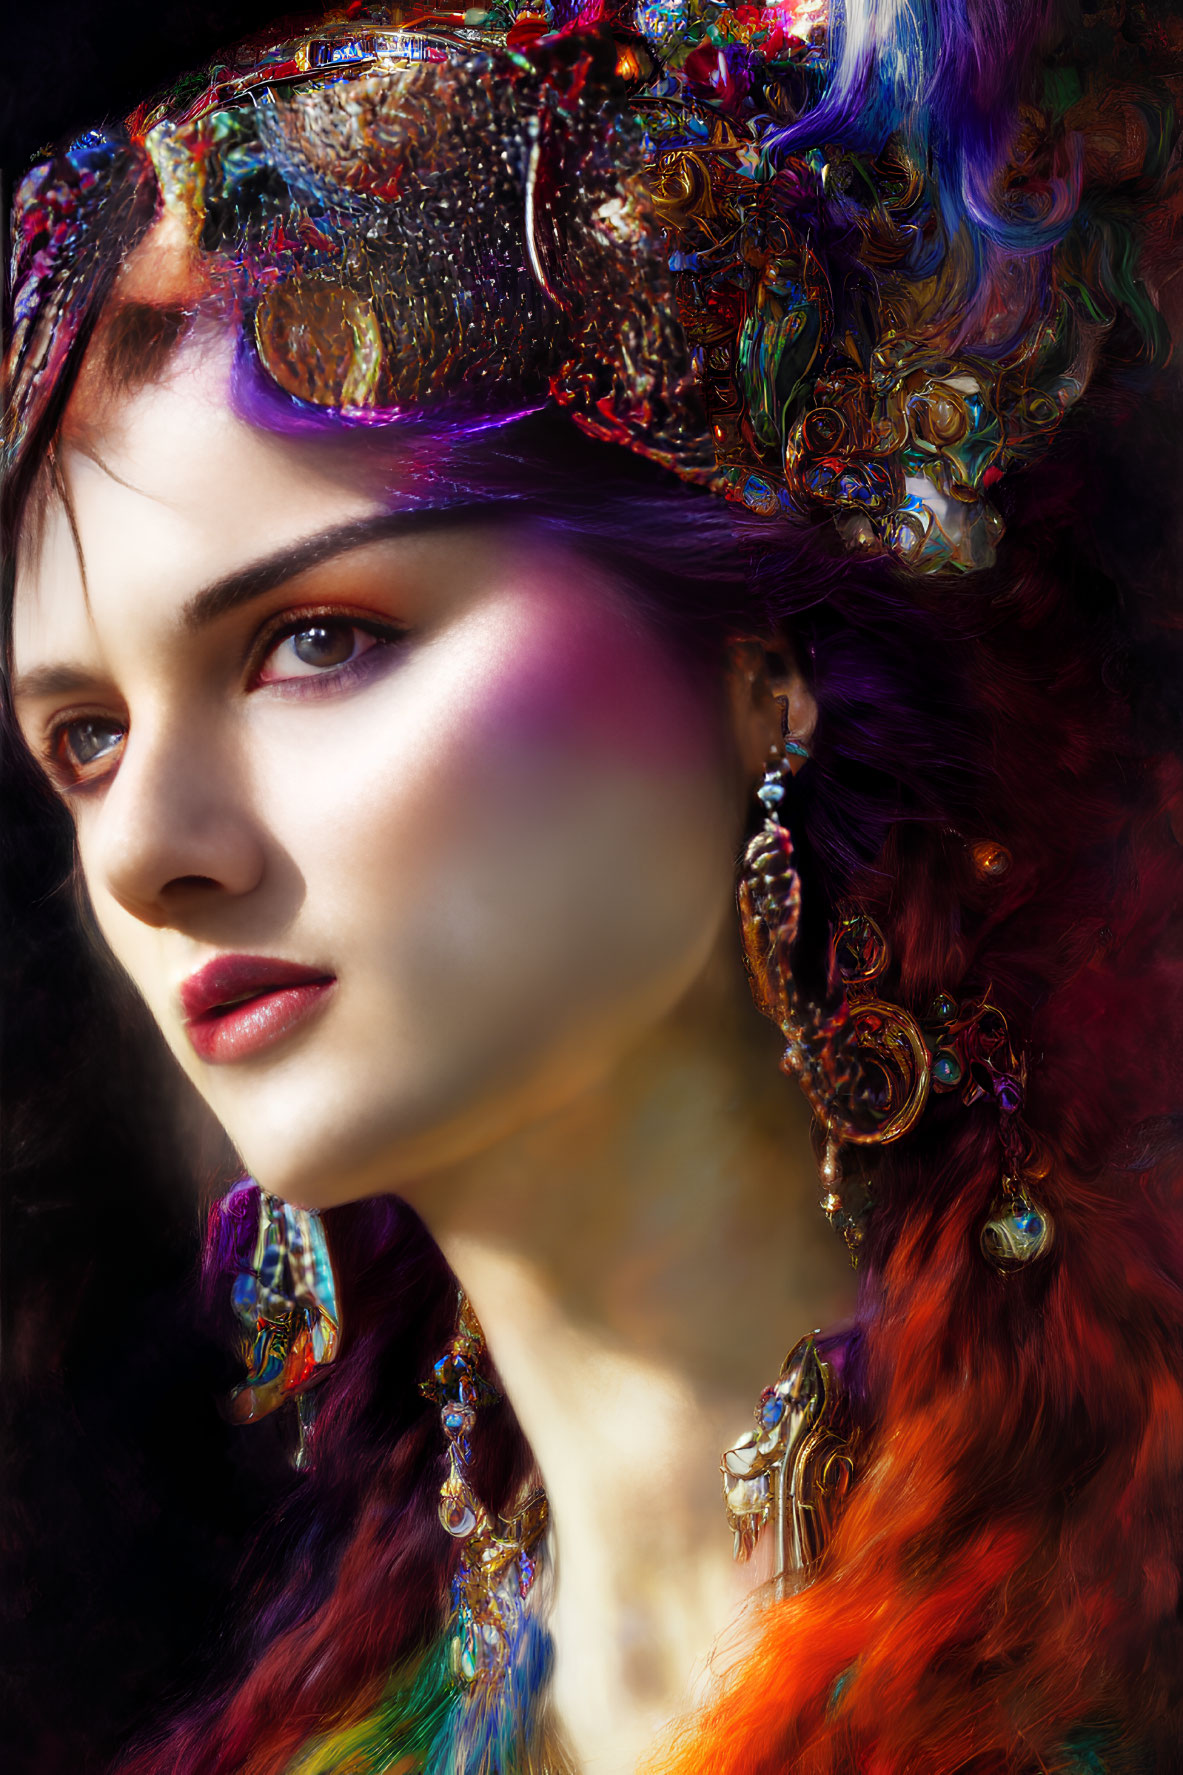 Colorful woman portrait with ornate headdress on dark background